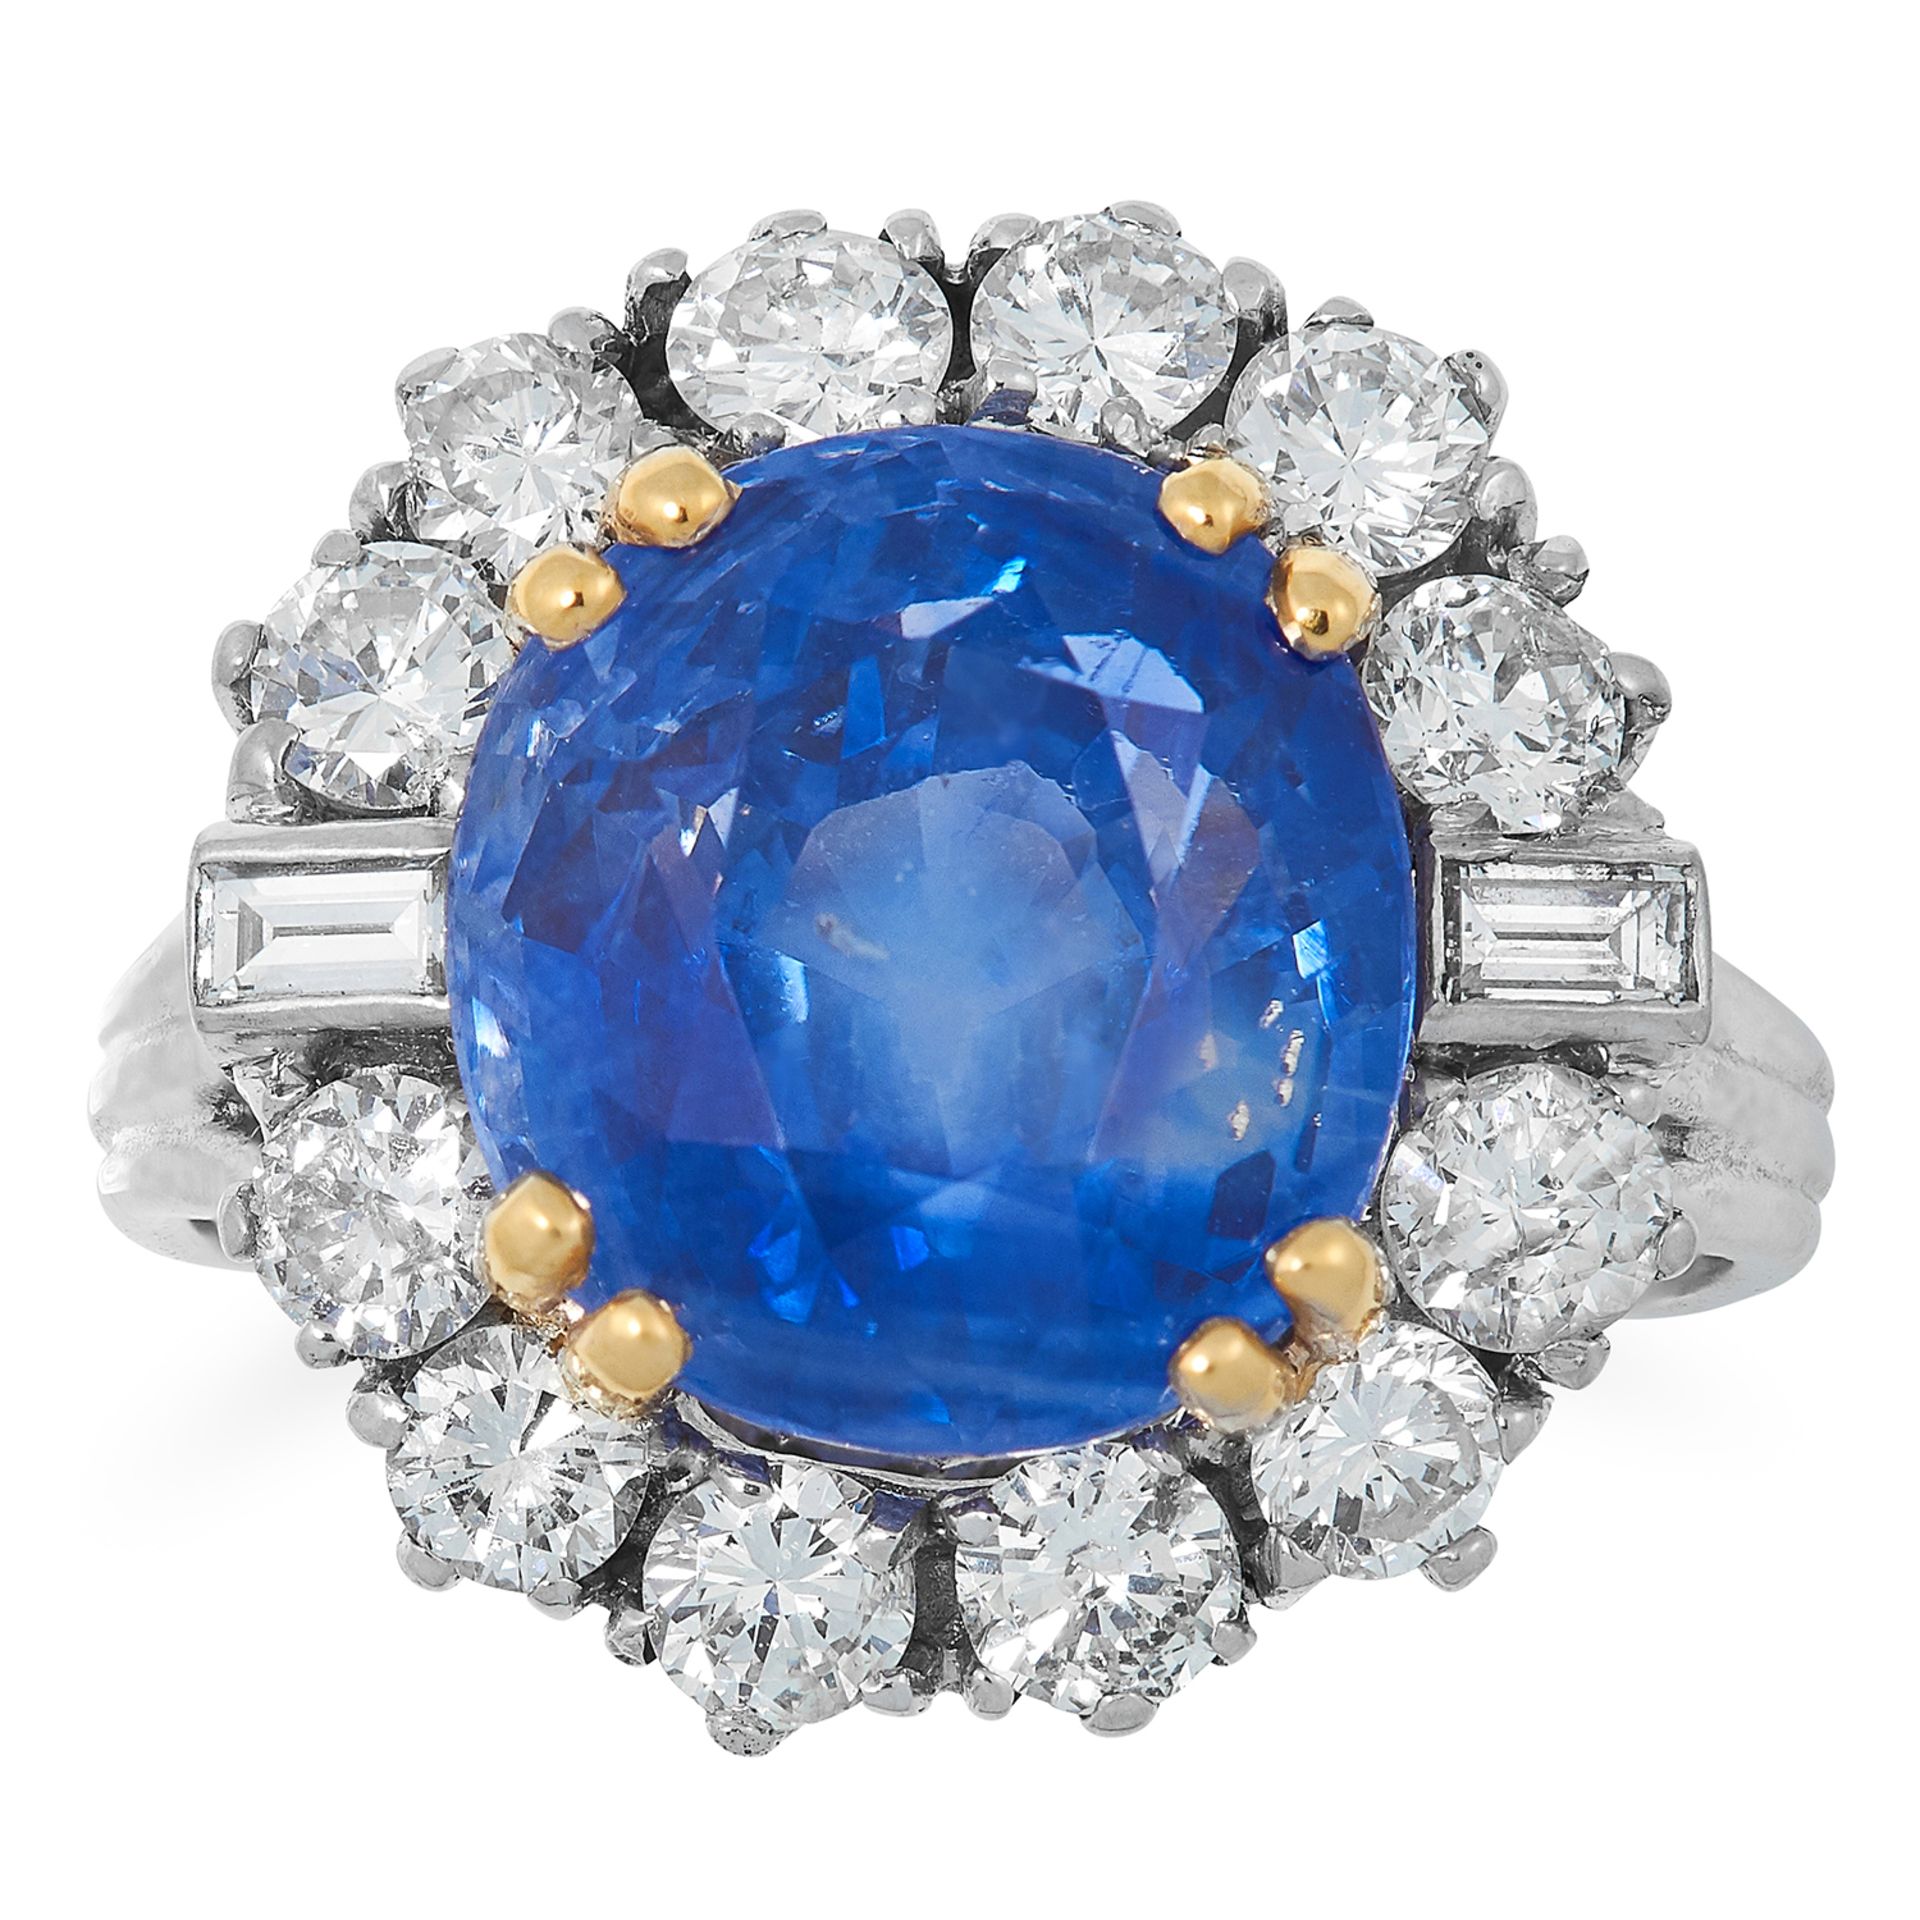 A SAPPHIRE AND DIAMOND CLUSTER RING set with a cushion cut sapphire of 10.87 carats in a cluster